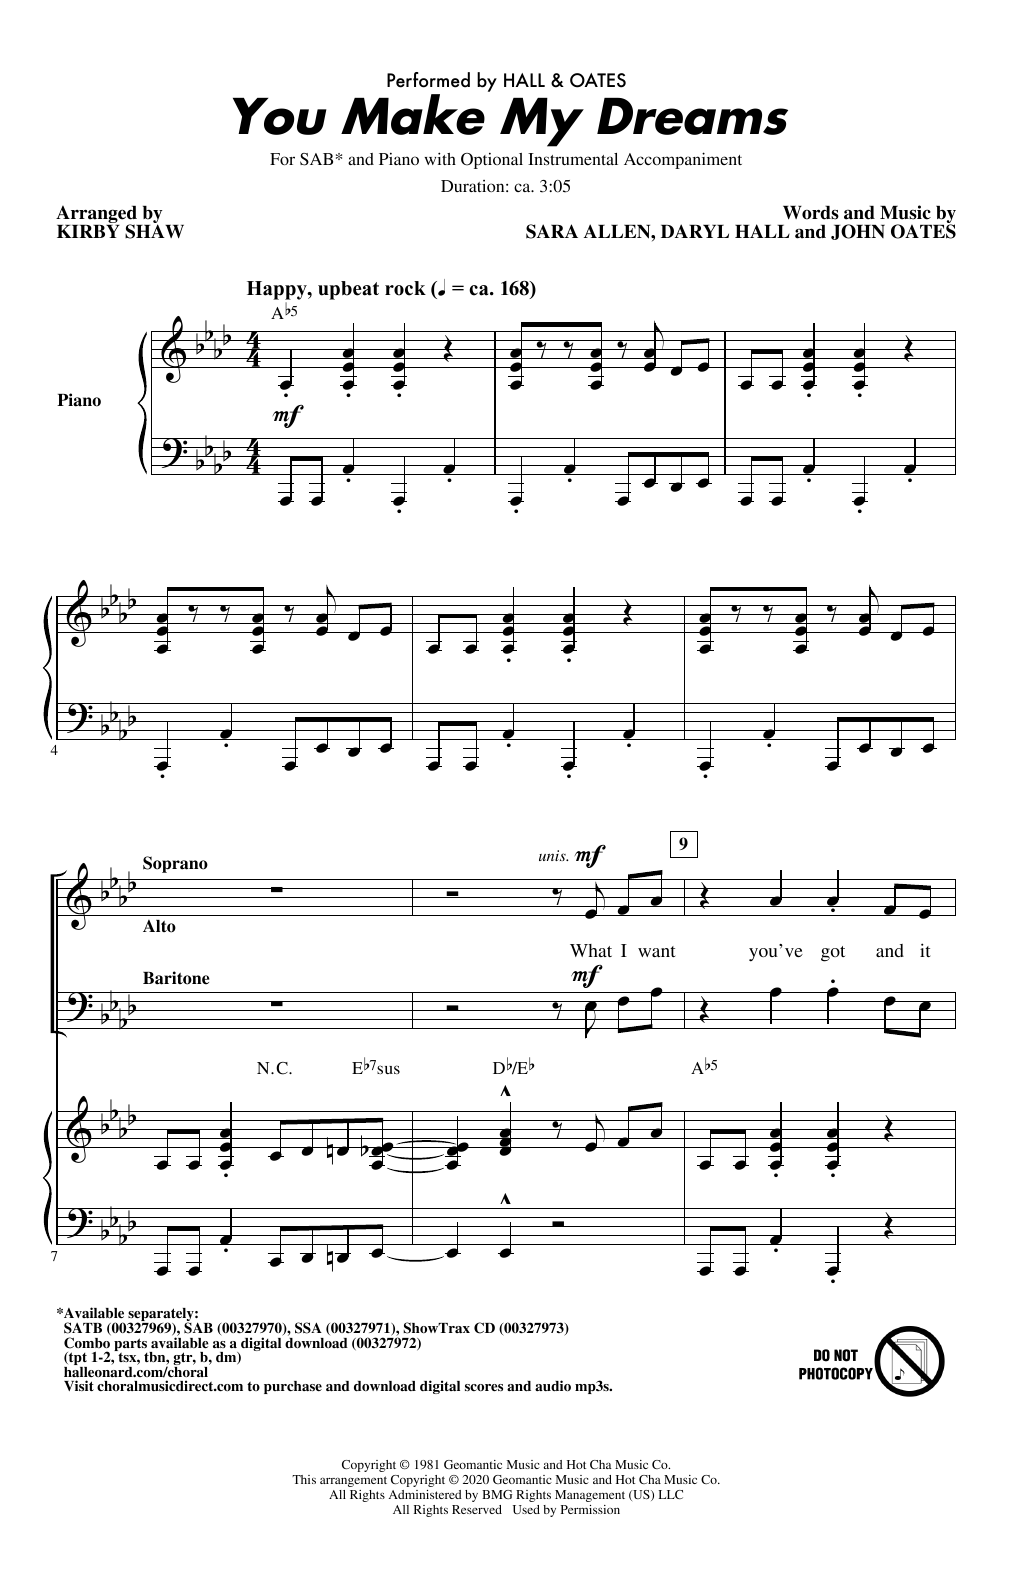 Download Hall & Oates You Make My Dreams (arr. Kirby Shaw) Sheet Music